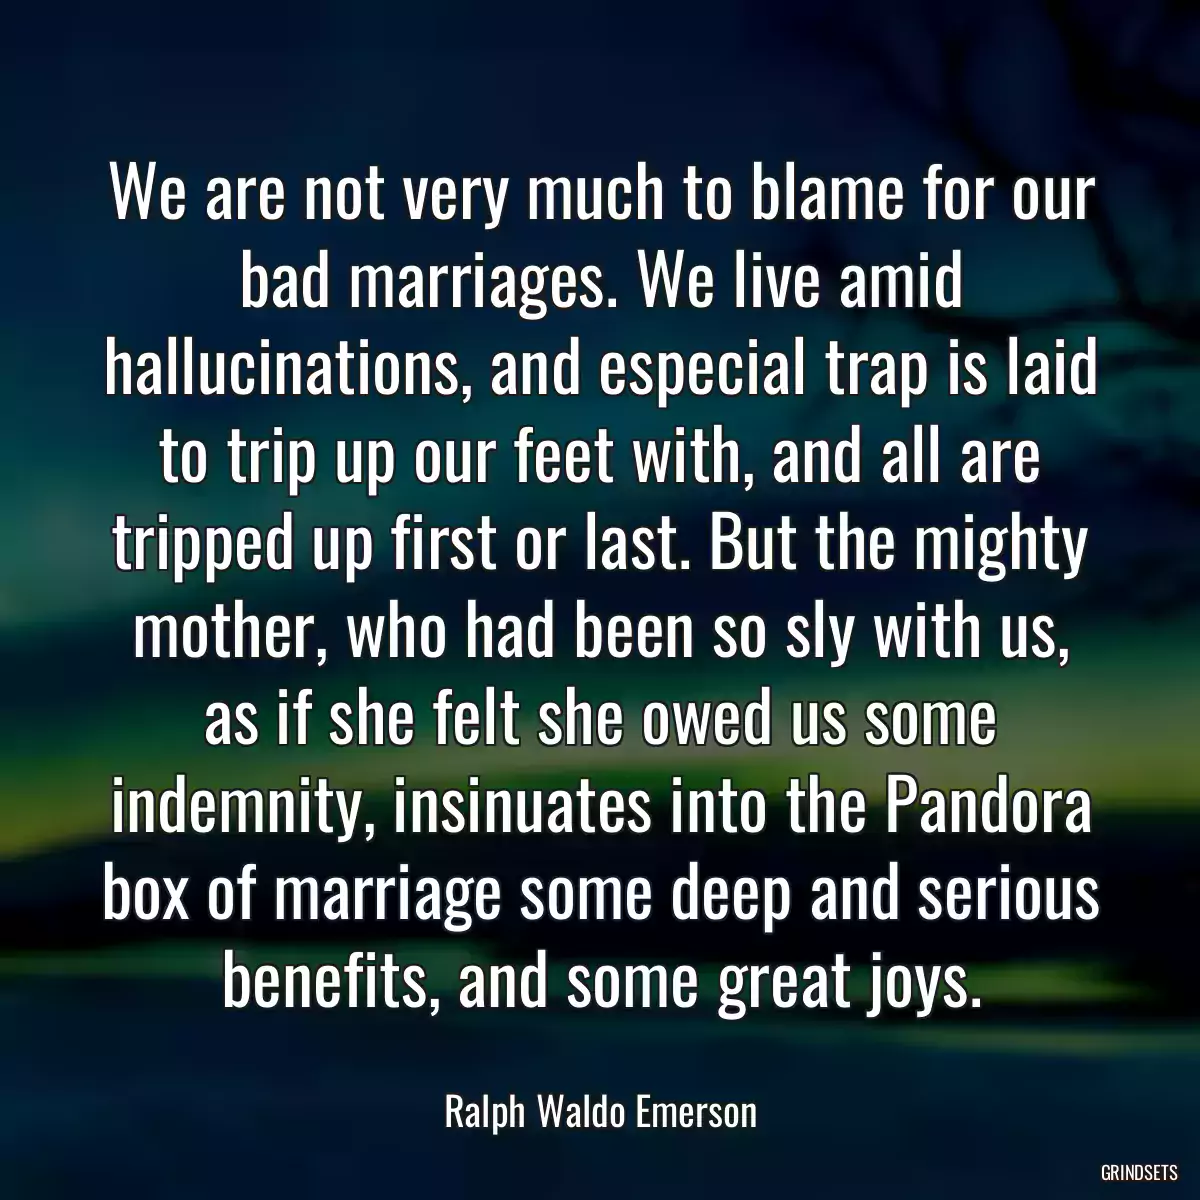 We are not very much to blame for our bad marriages. We live amid hallucinations, and especial trap is laid to trip up our feet with, and all are tripped up first or last. But the mighty mother, who had been so sly with us, as if she felt she owed us some indemnity, insinuates into the Pandora box of marriage some deep and serious benefits, and some great joys.